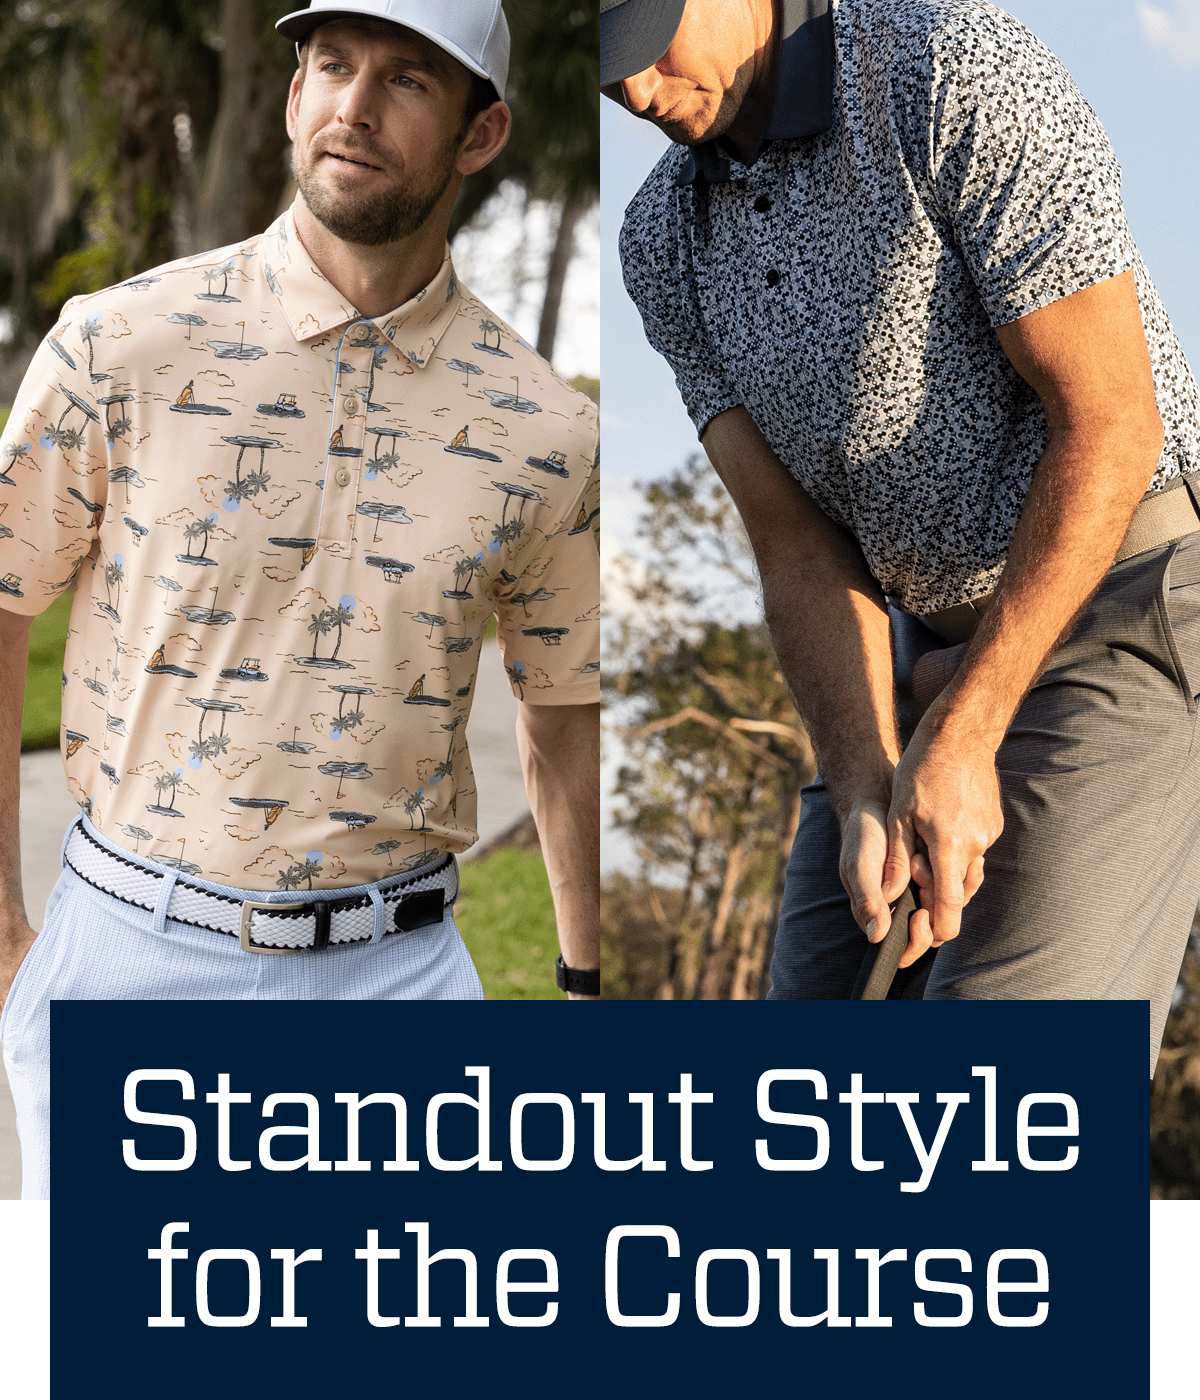 Standout style for the course.